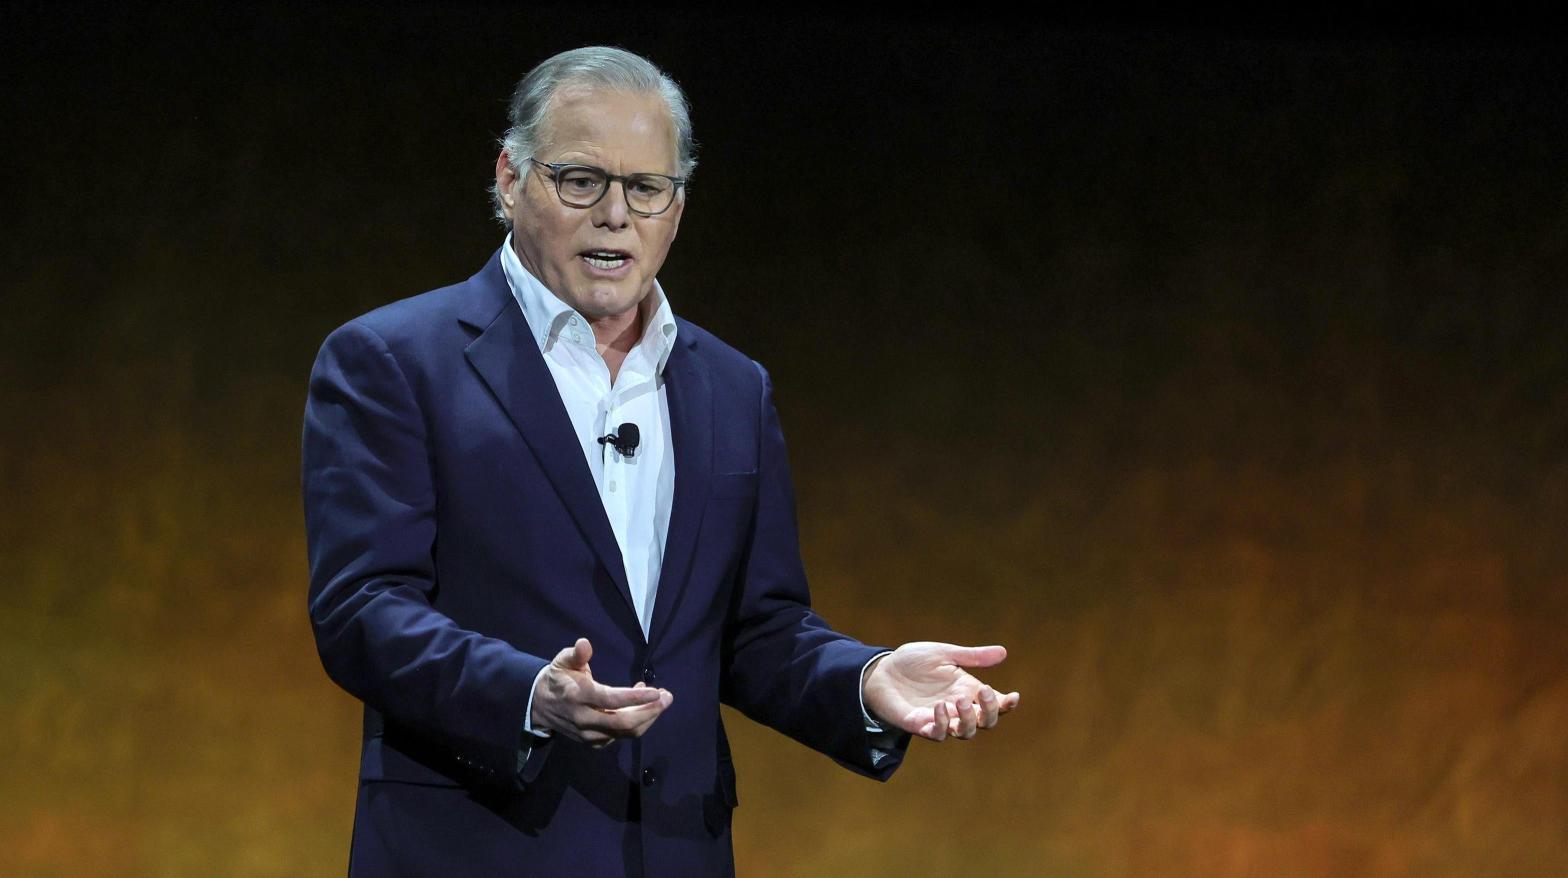 Warner Bros. Discovery president and CEO David Zaslav speaks onstage during the Warner Bros. Pictures Studio presentation during CinemaCon on April 25, 2023 in Las Vegas, Nevada. (Photo: Ethan Miller/Getty Images, Getty Images)